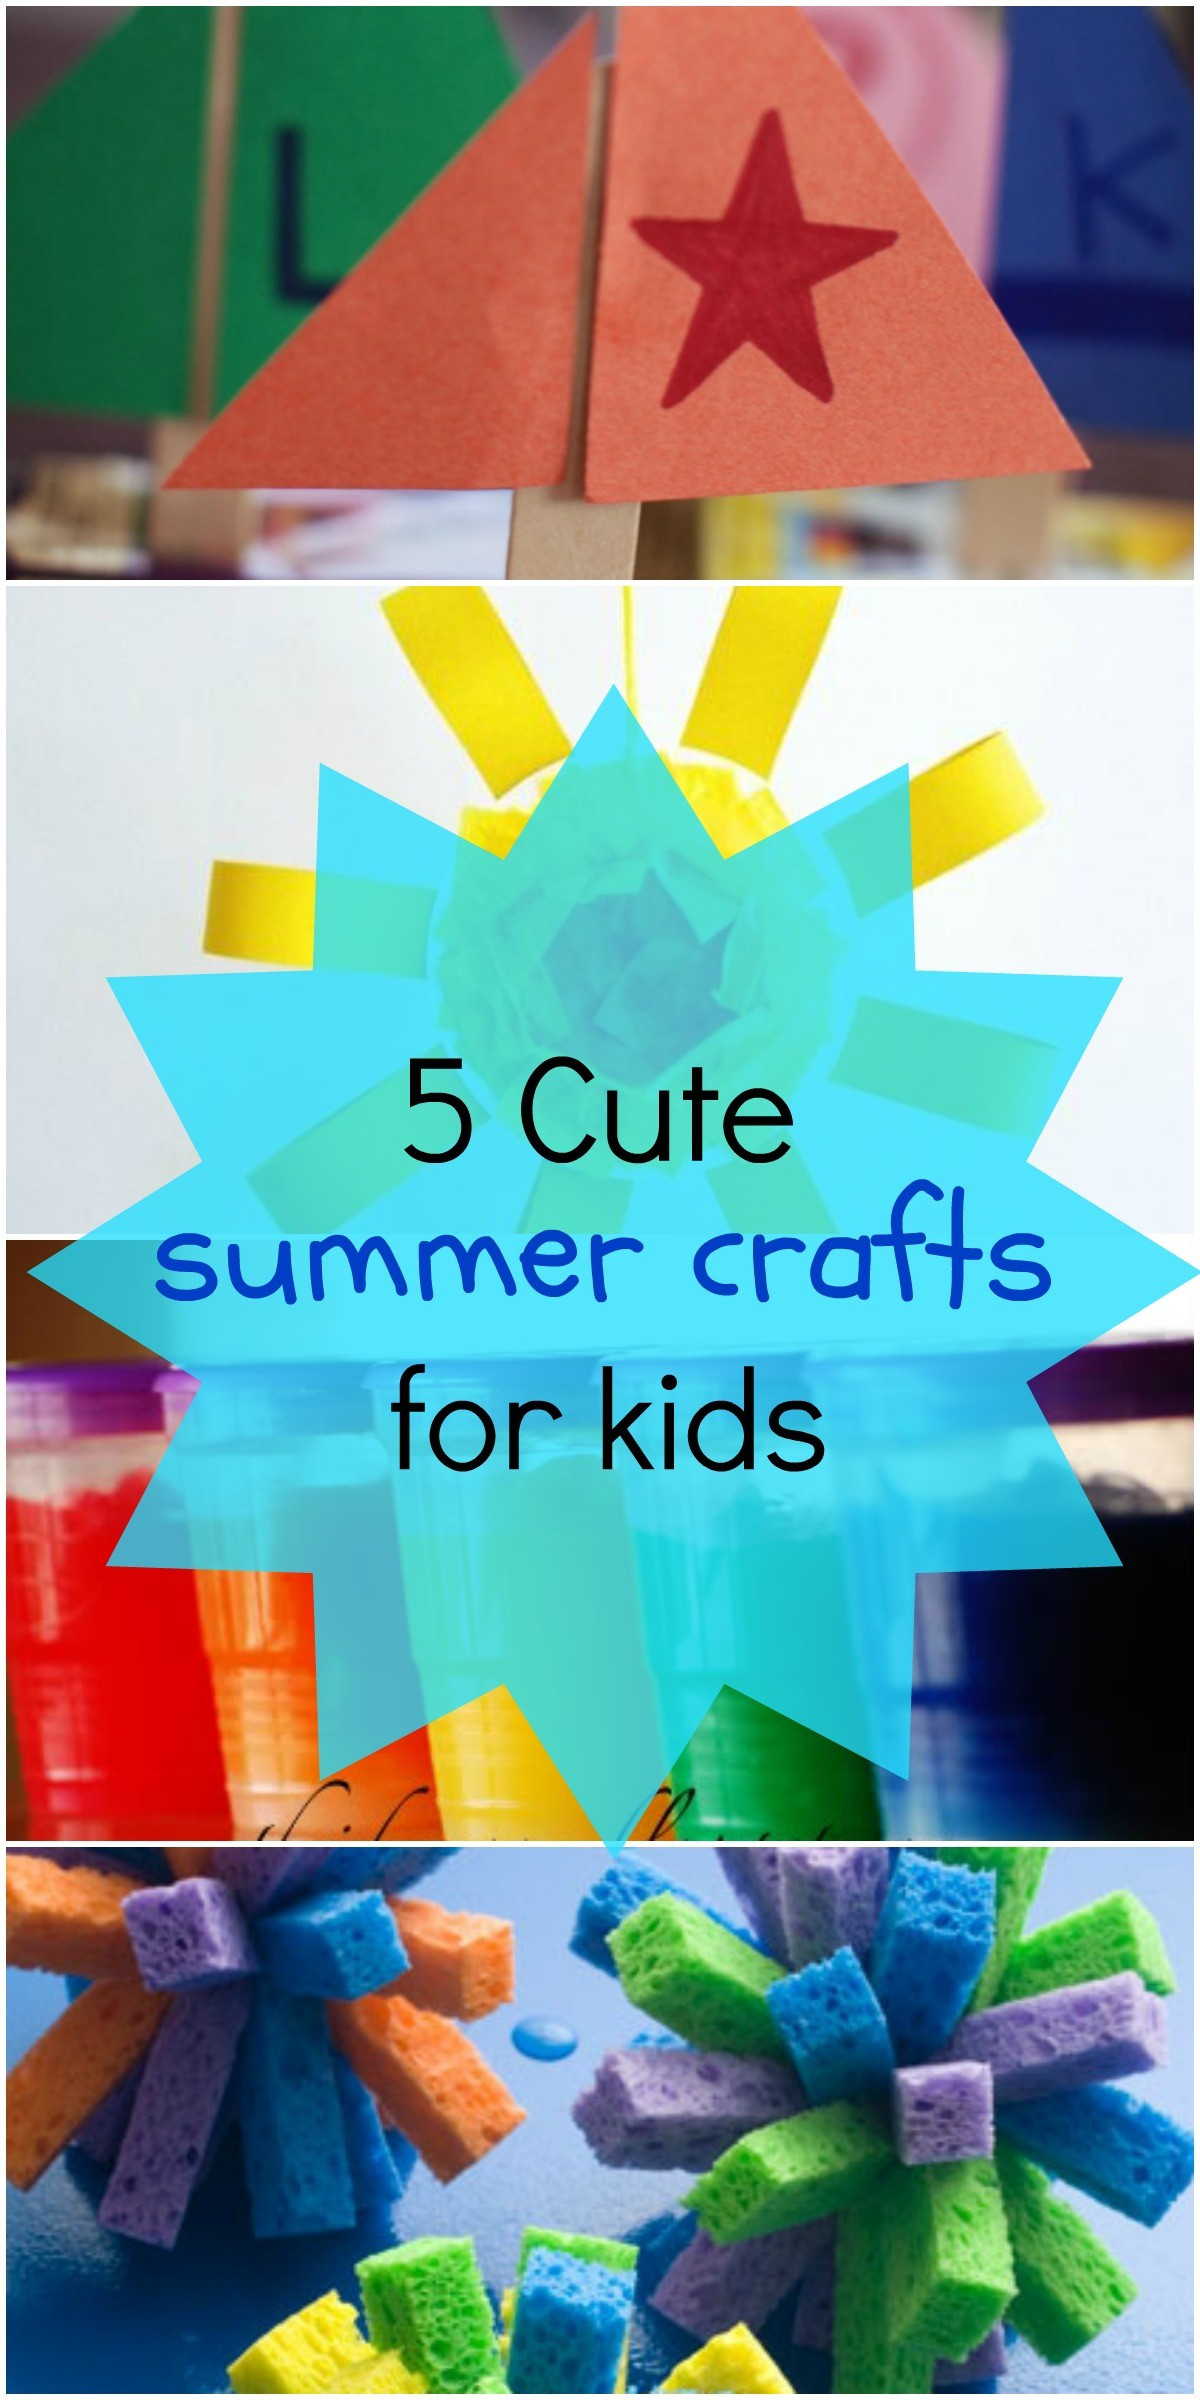 Summer Crafts Ideas For Preschoolers
 5 Fun Summer Crafts for Kids Love These Art Project Ideas